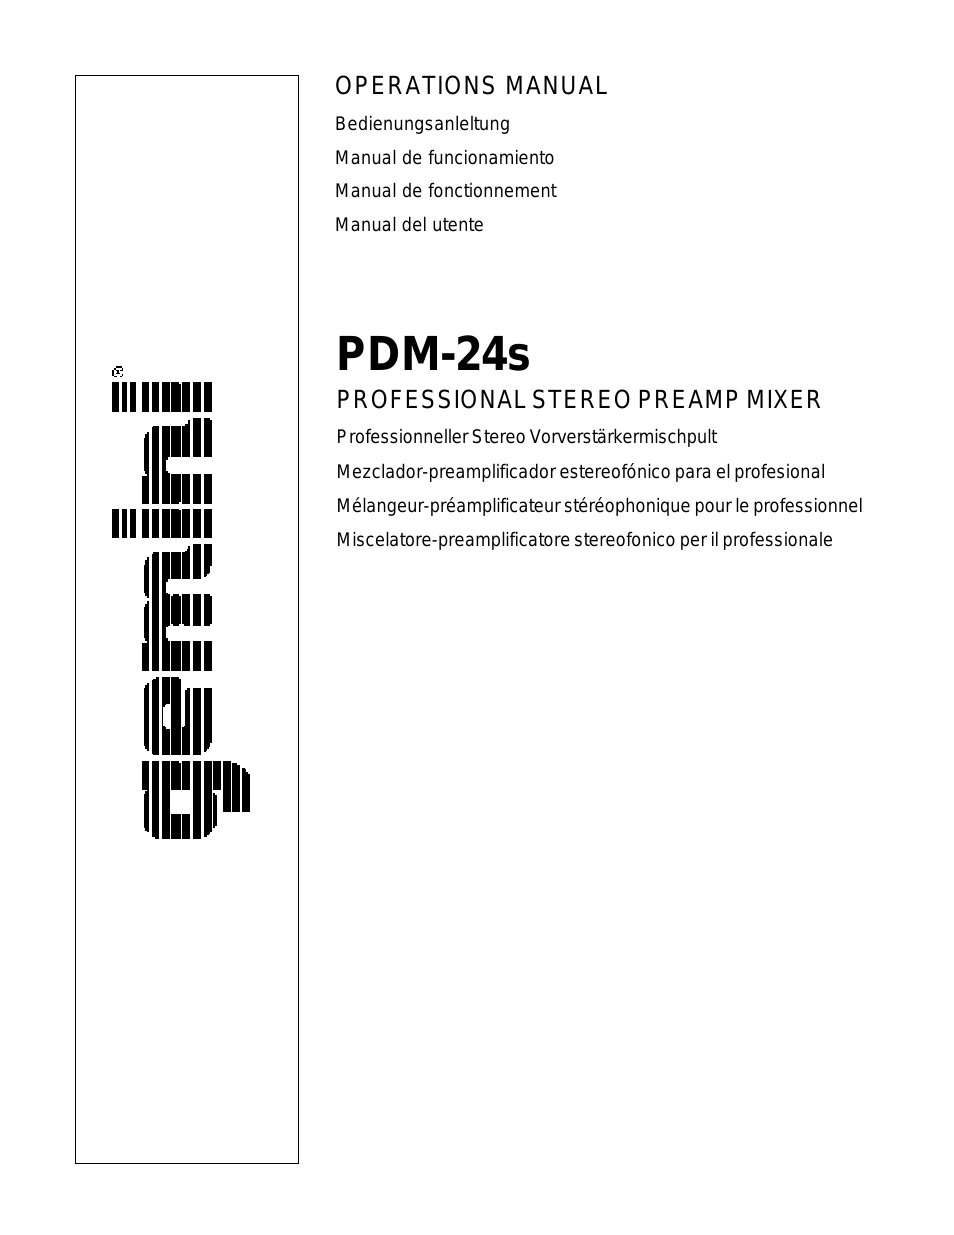 PDM-24s